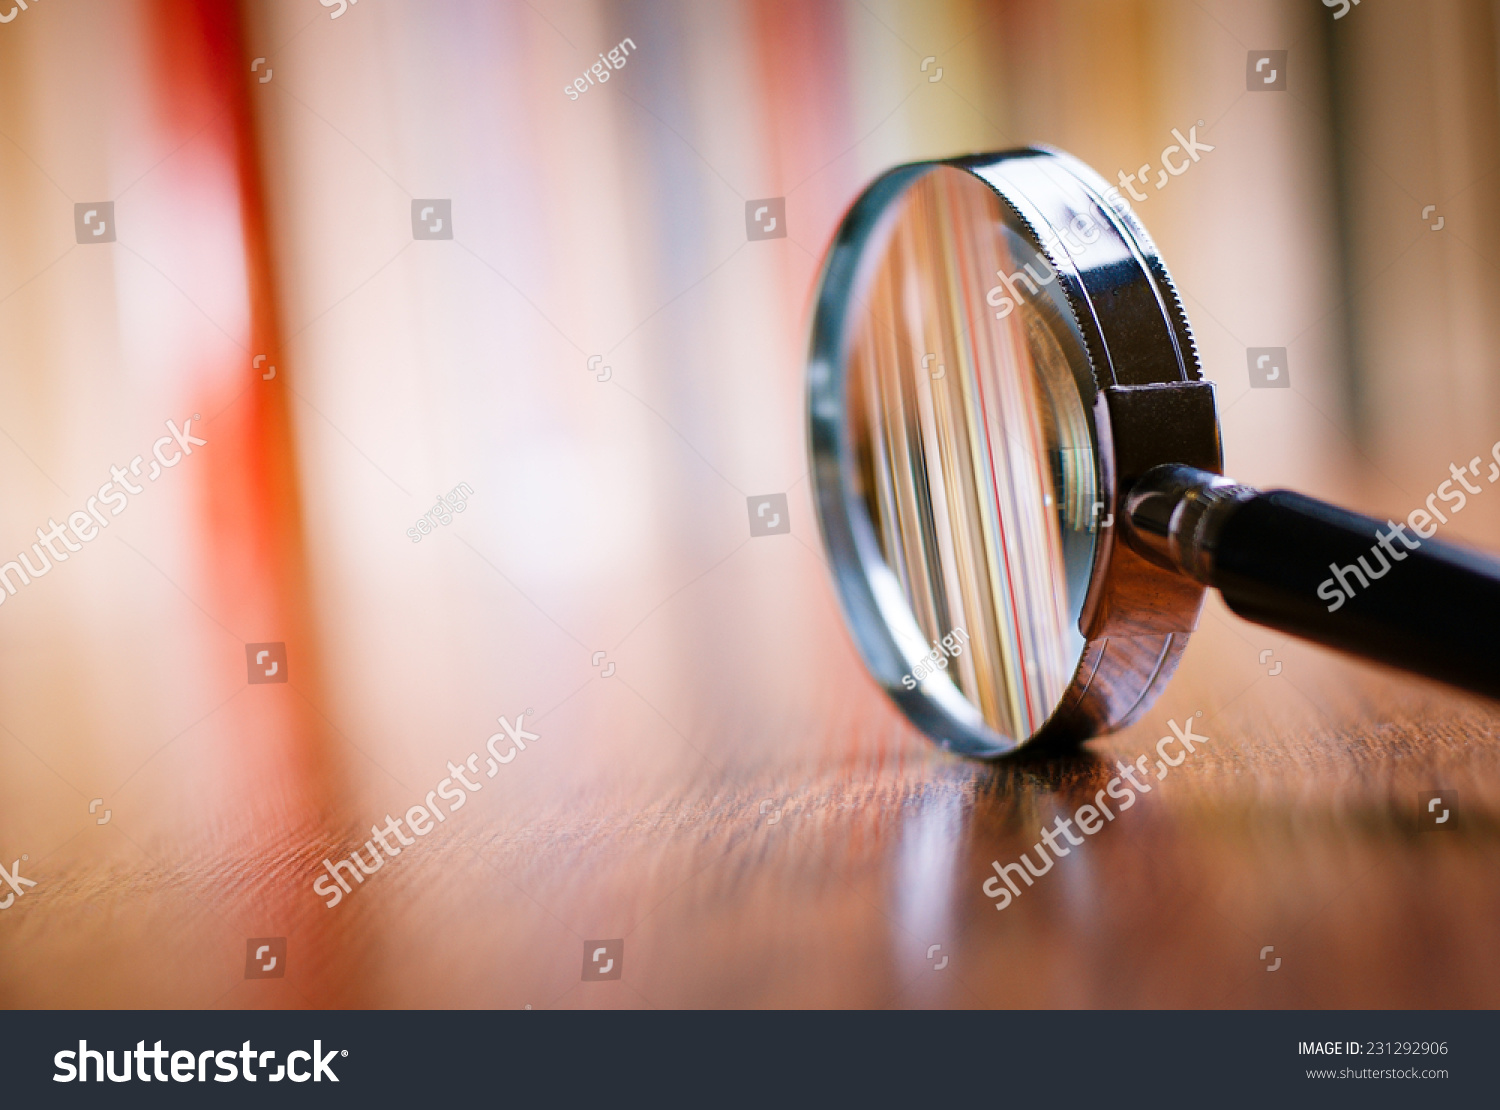 Close up Single Magnifying Glass with Black Handle, Leaning on the Wooden Table at the Office. #231292906